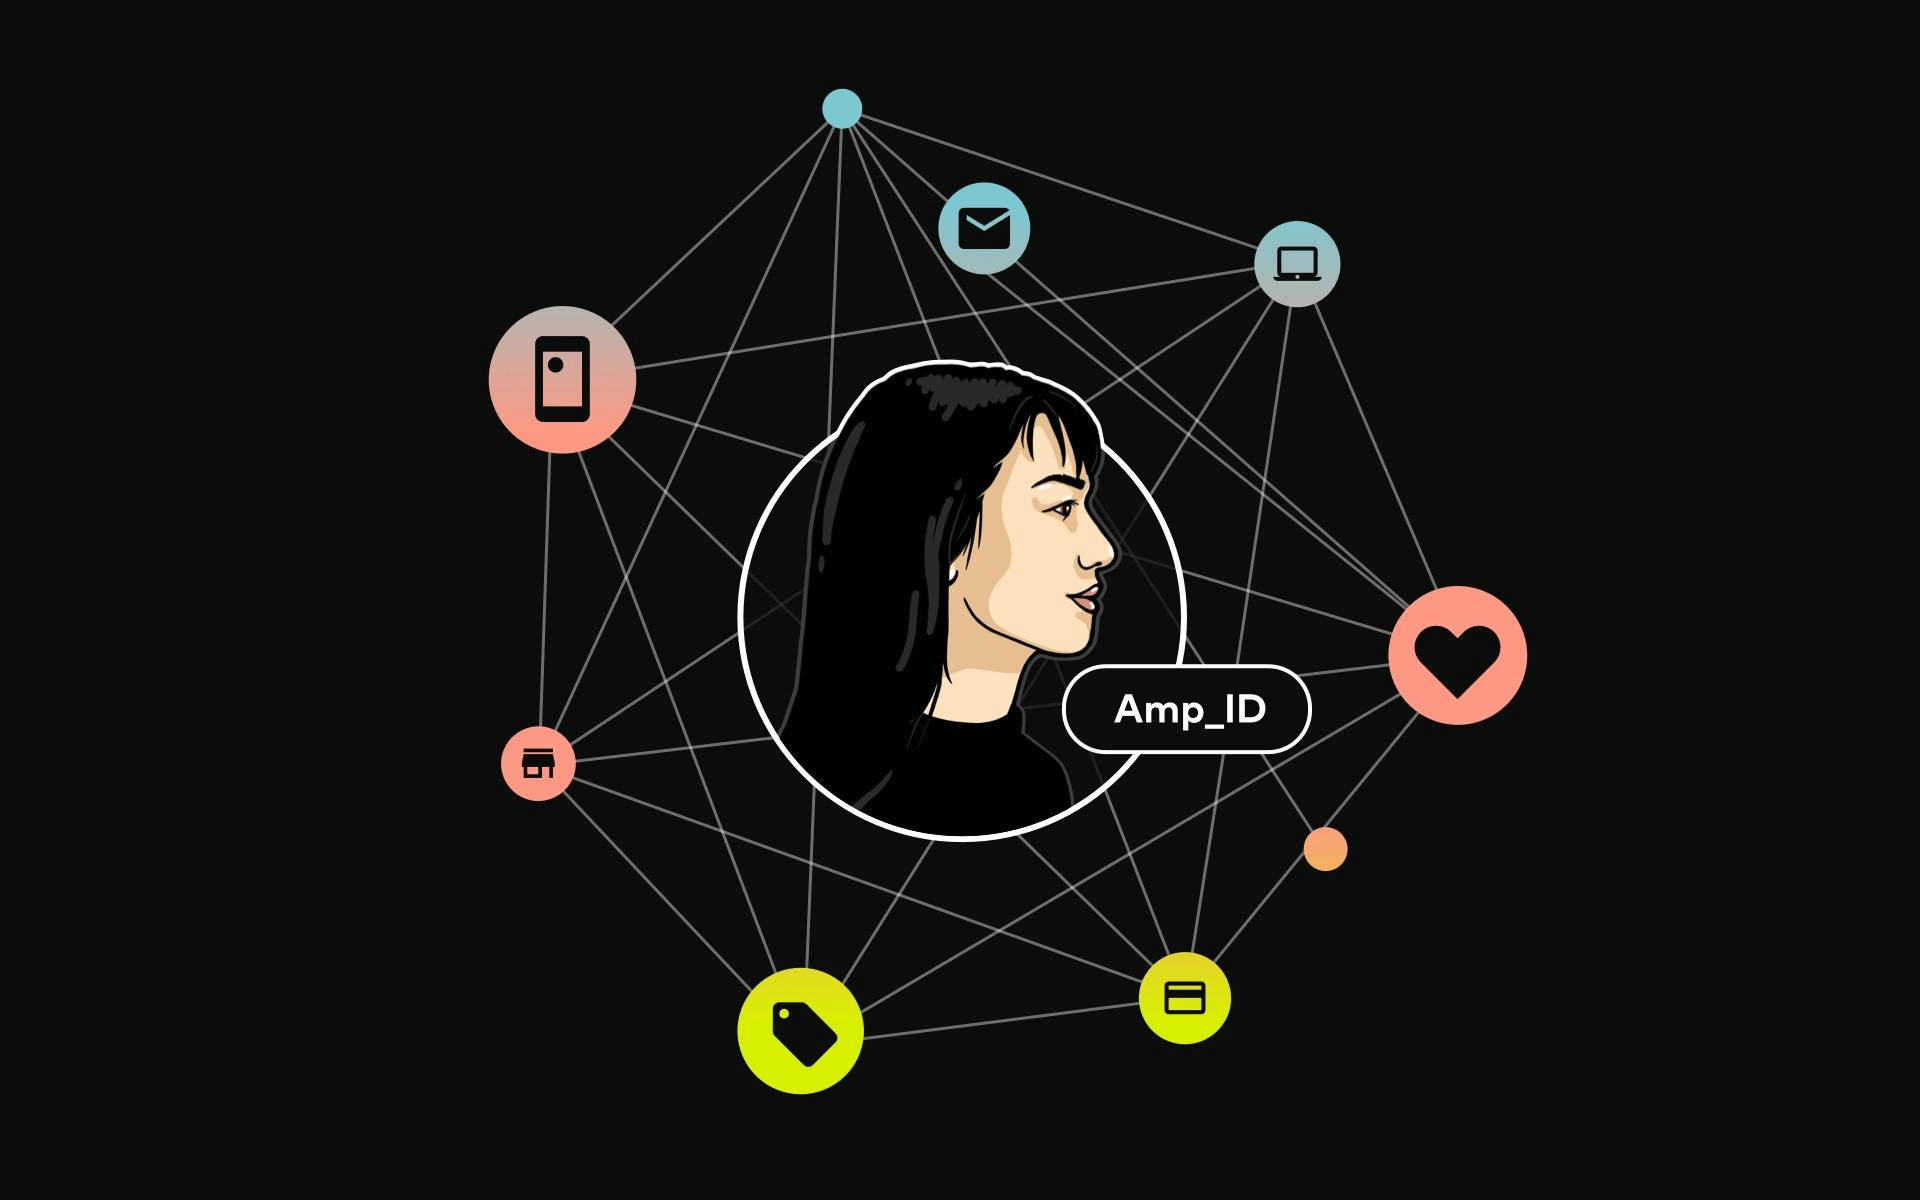 Full color illustration of woman having her brand activity linked to her through AmpID